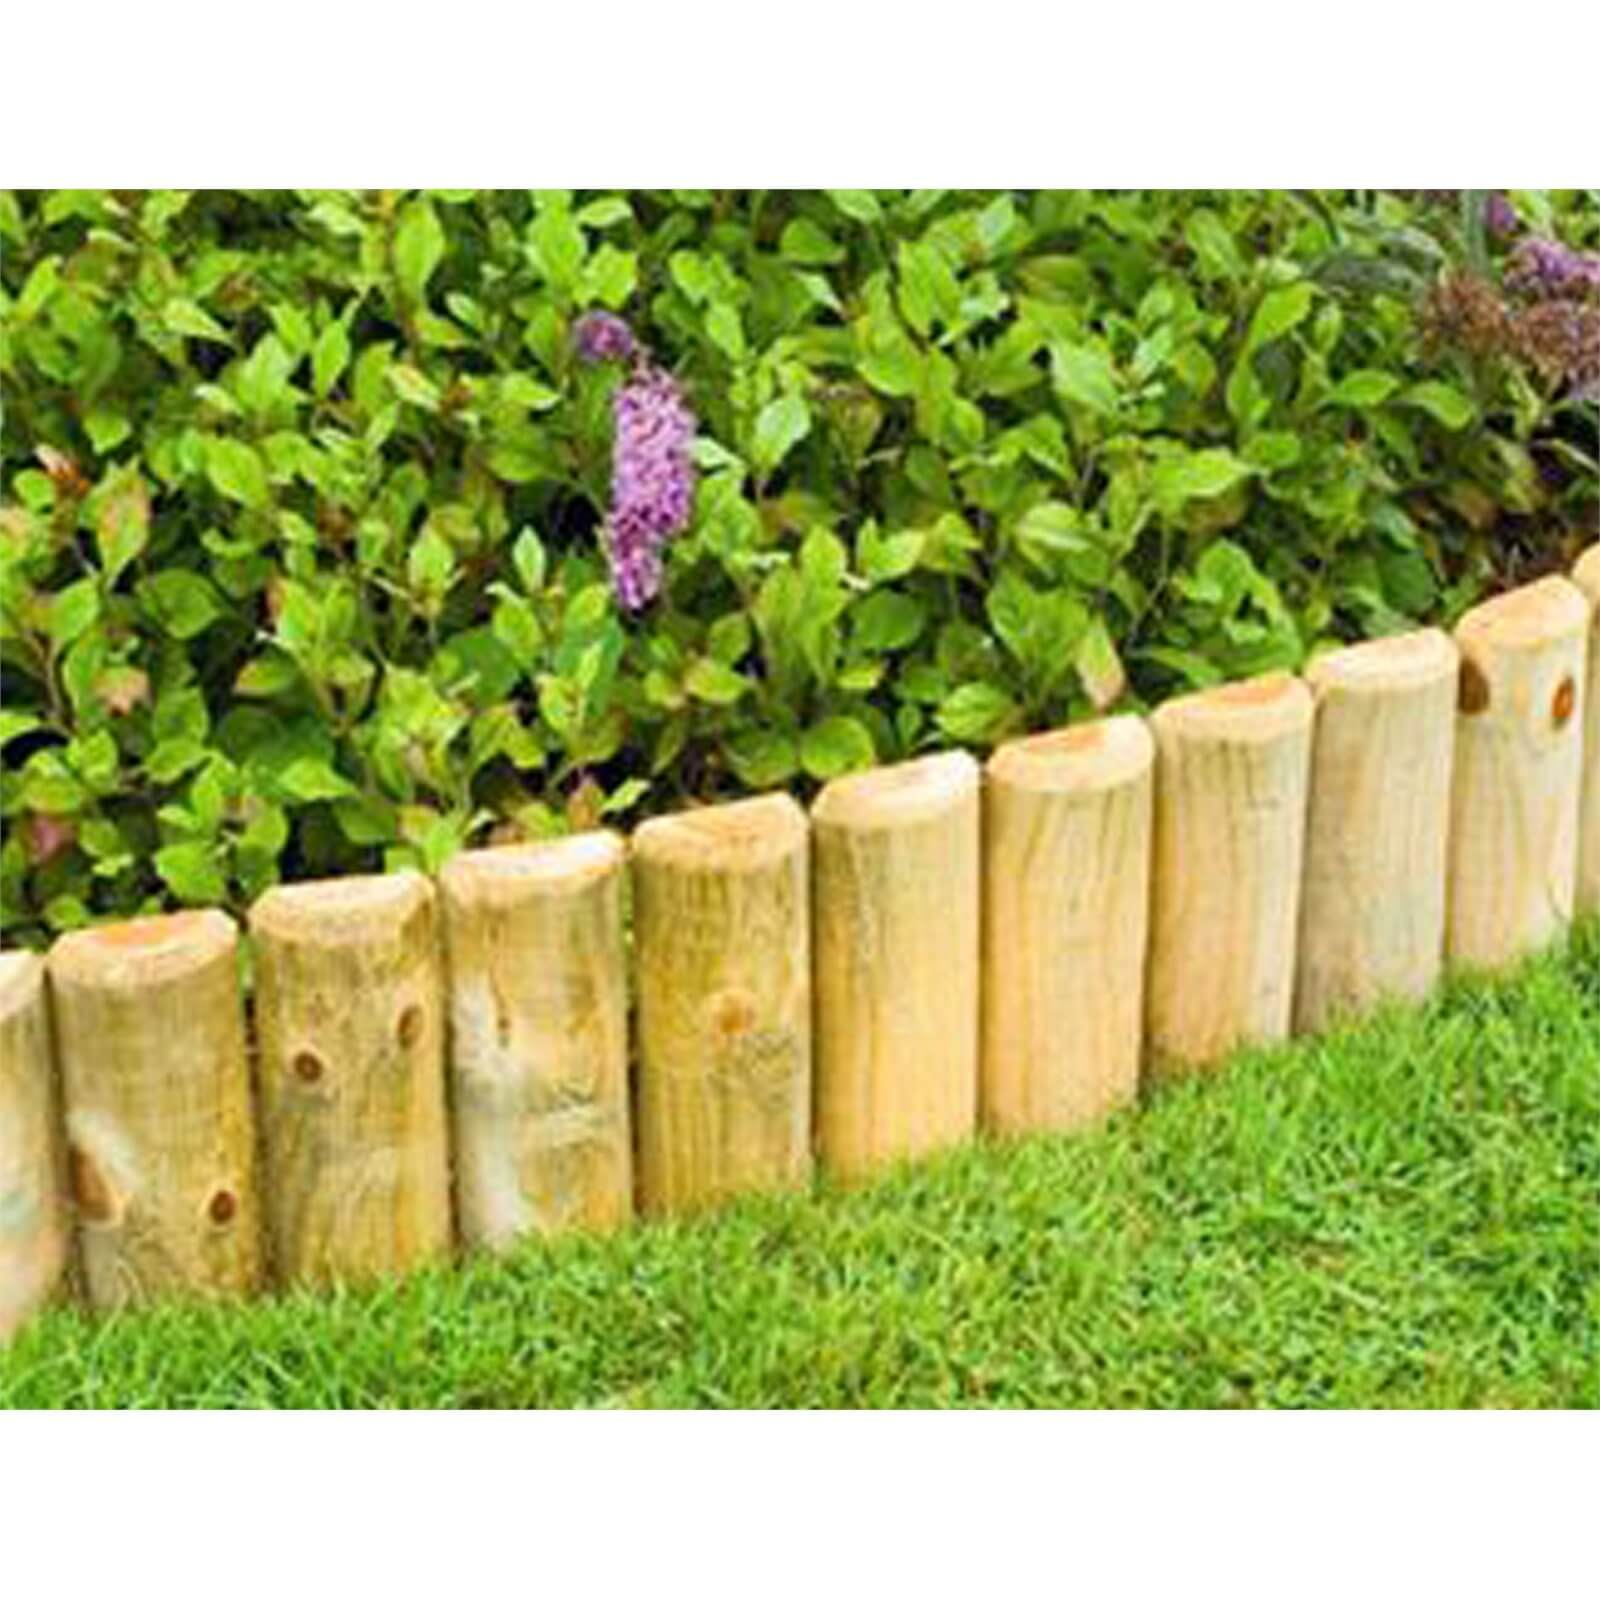 Softwood Garden Border Section - 1m x 150mm